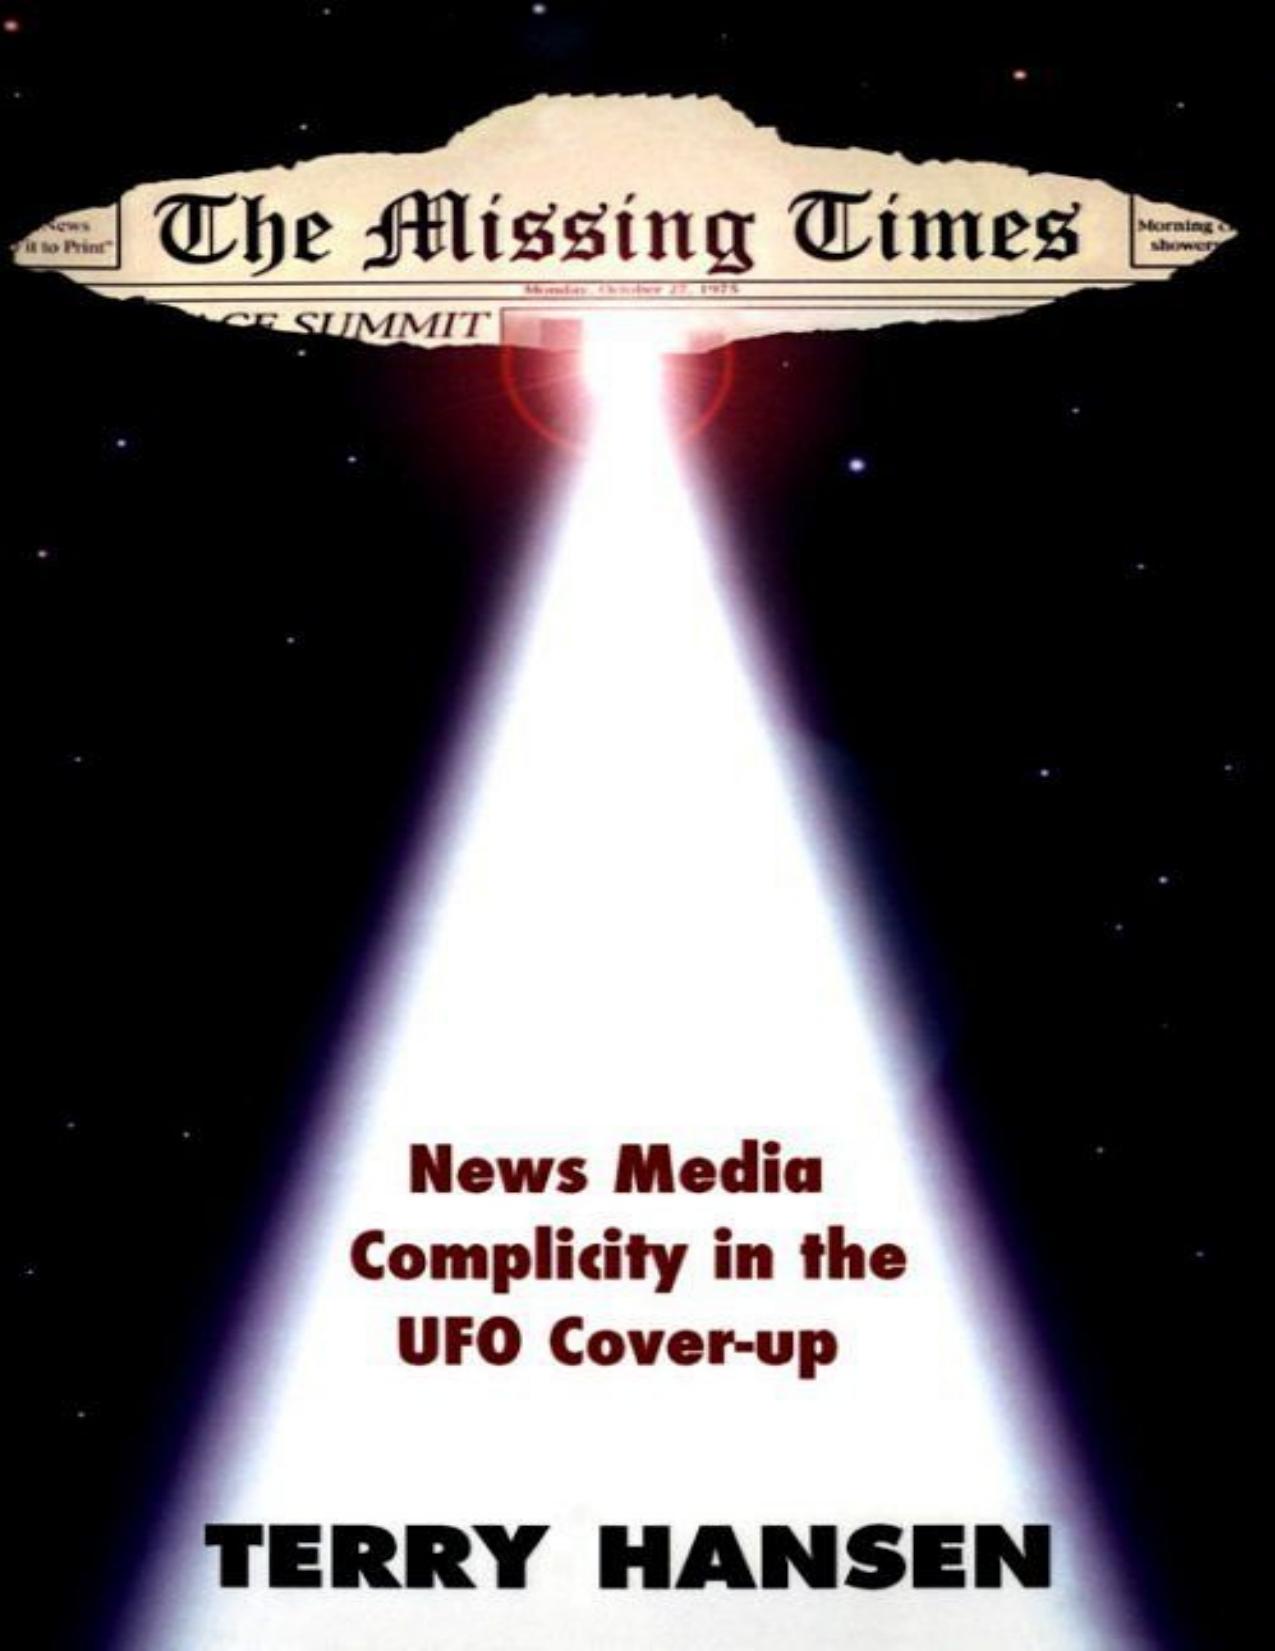 The Missing Times: News Media Complicity in the UFO Cover-Up by Terry Hansen